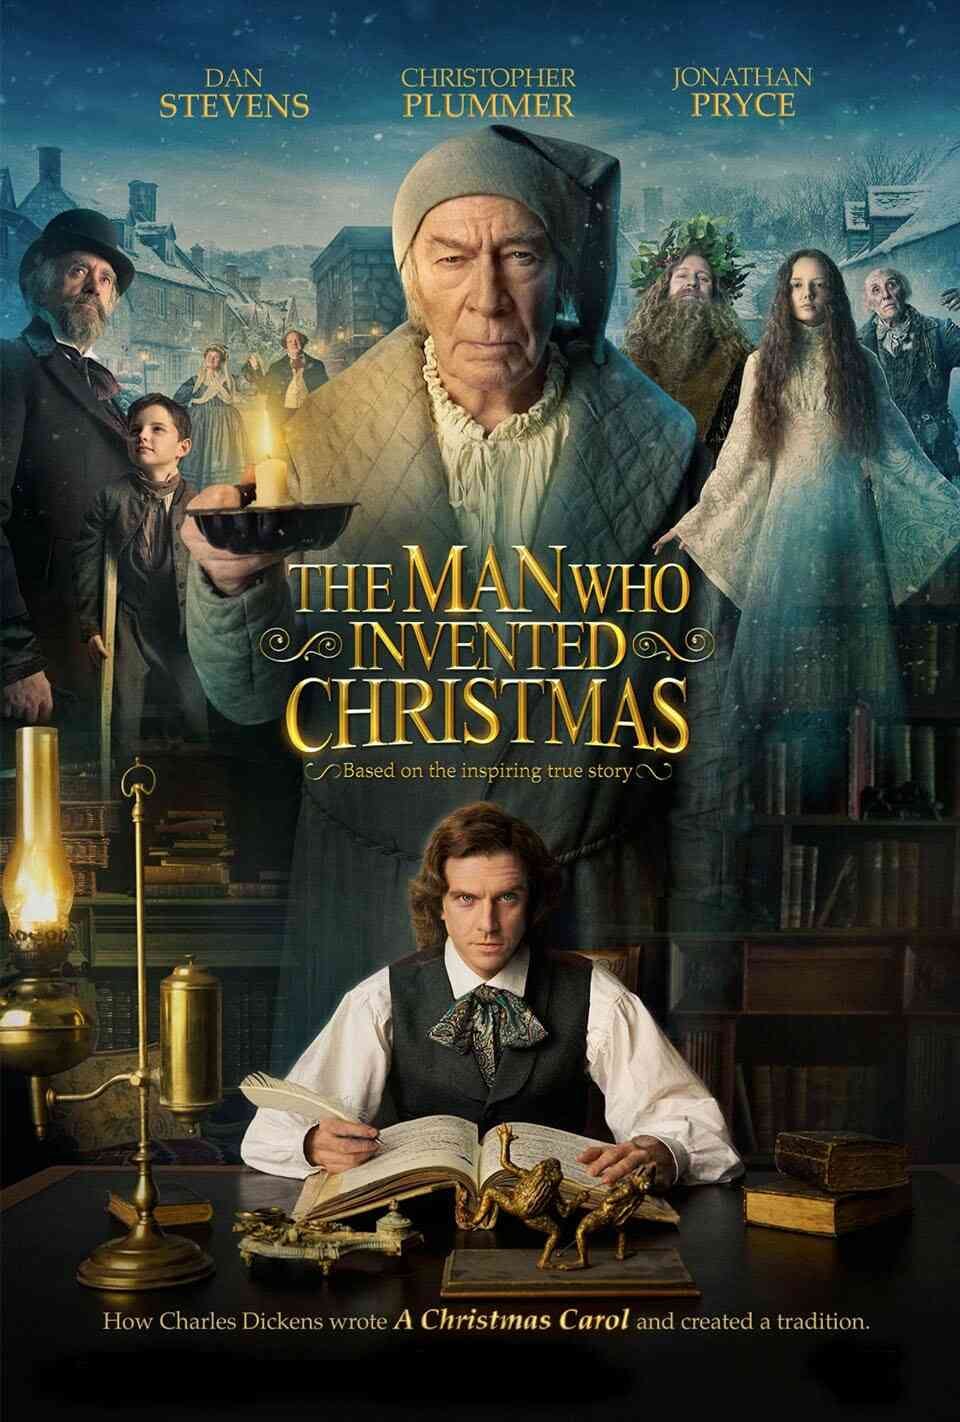 Read The Man Who Invented Christmas screenplay (poster)